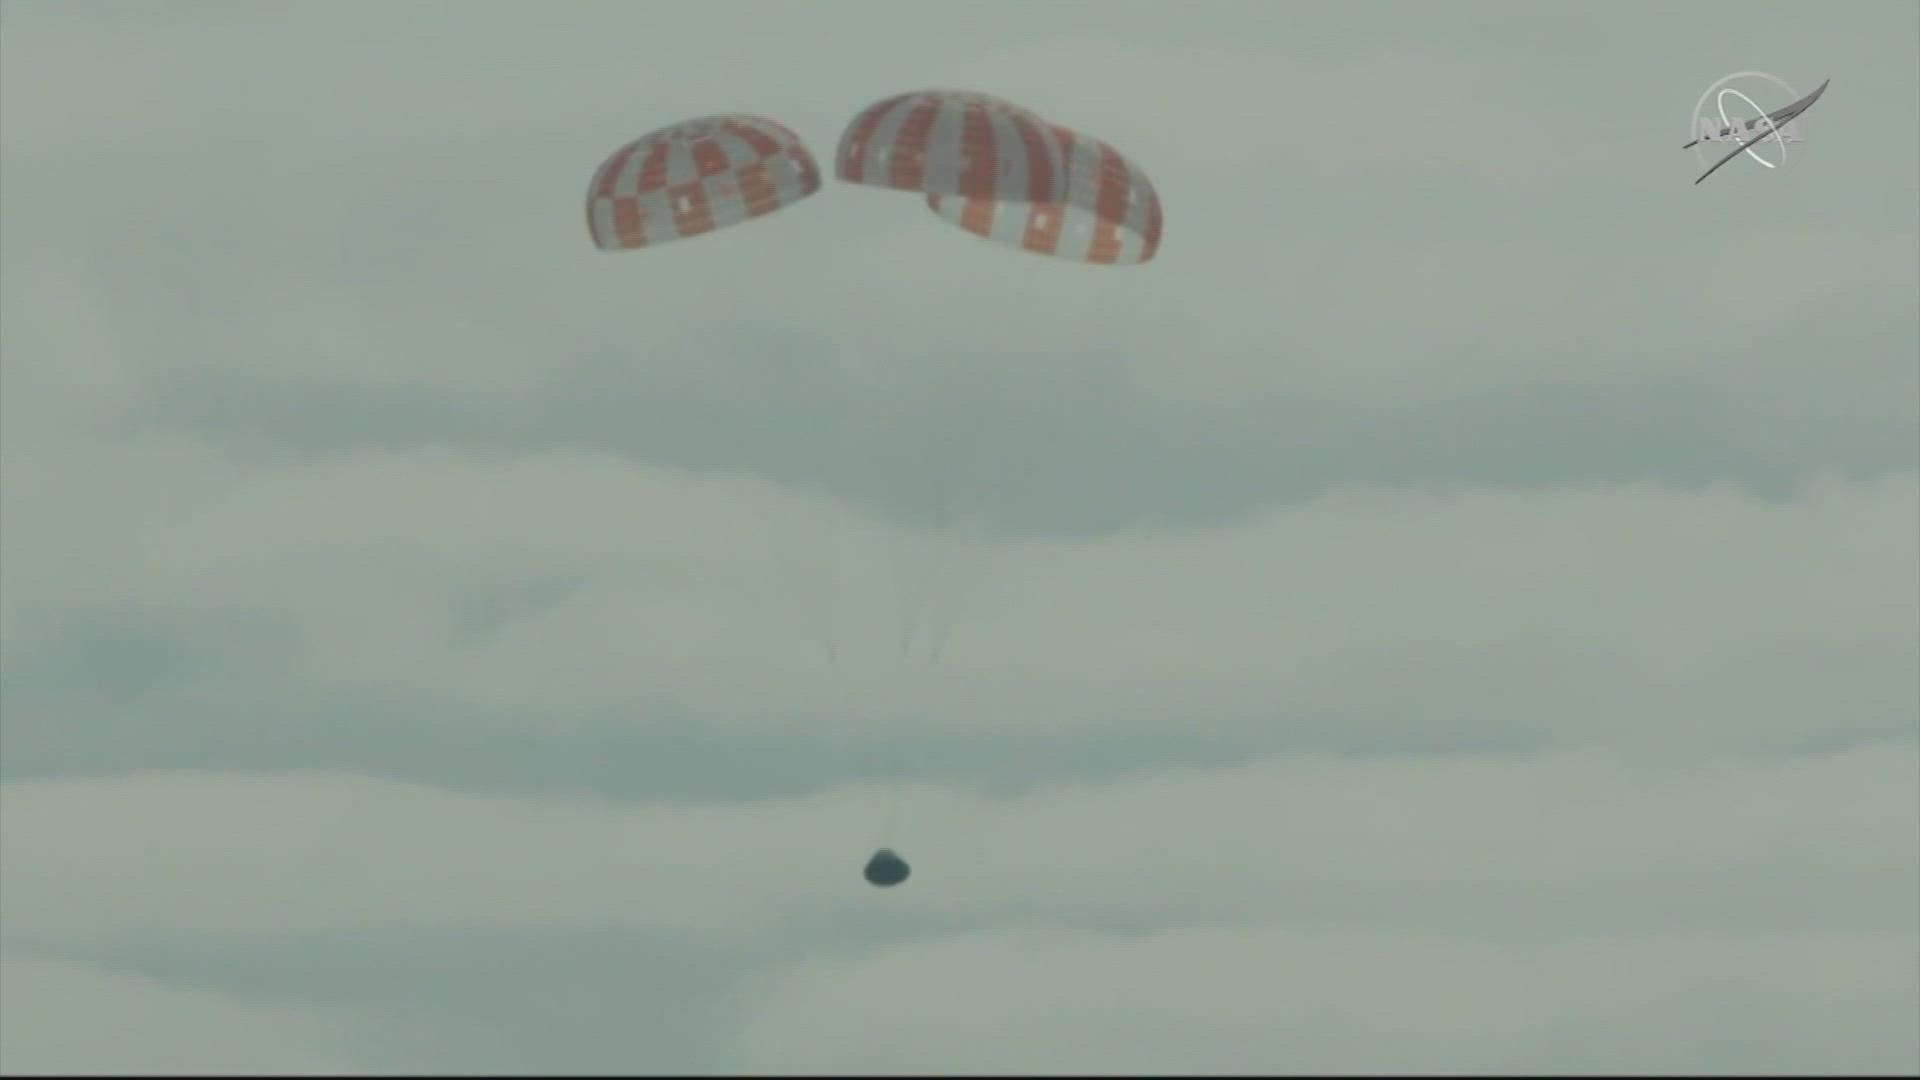 NASA's Orion capsule returned Sunday, Dec. 11. Three dummies were onboard, concluding a test flight that should clear the way for astronauts on the next lunar flyby.